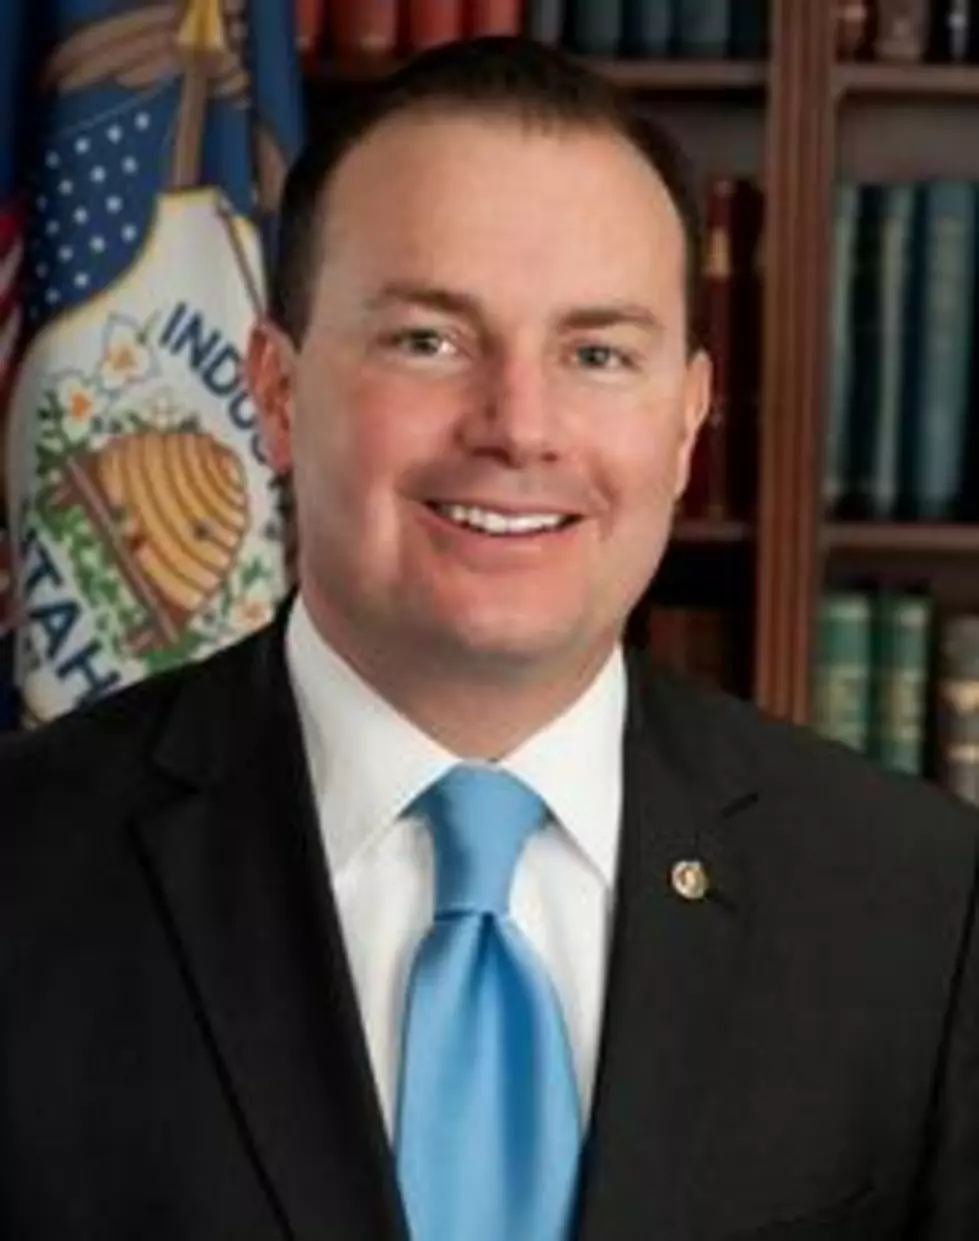 Senator Lee Says He Would Talk With Jan. 6 Committee